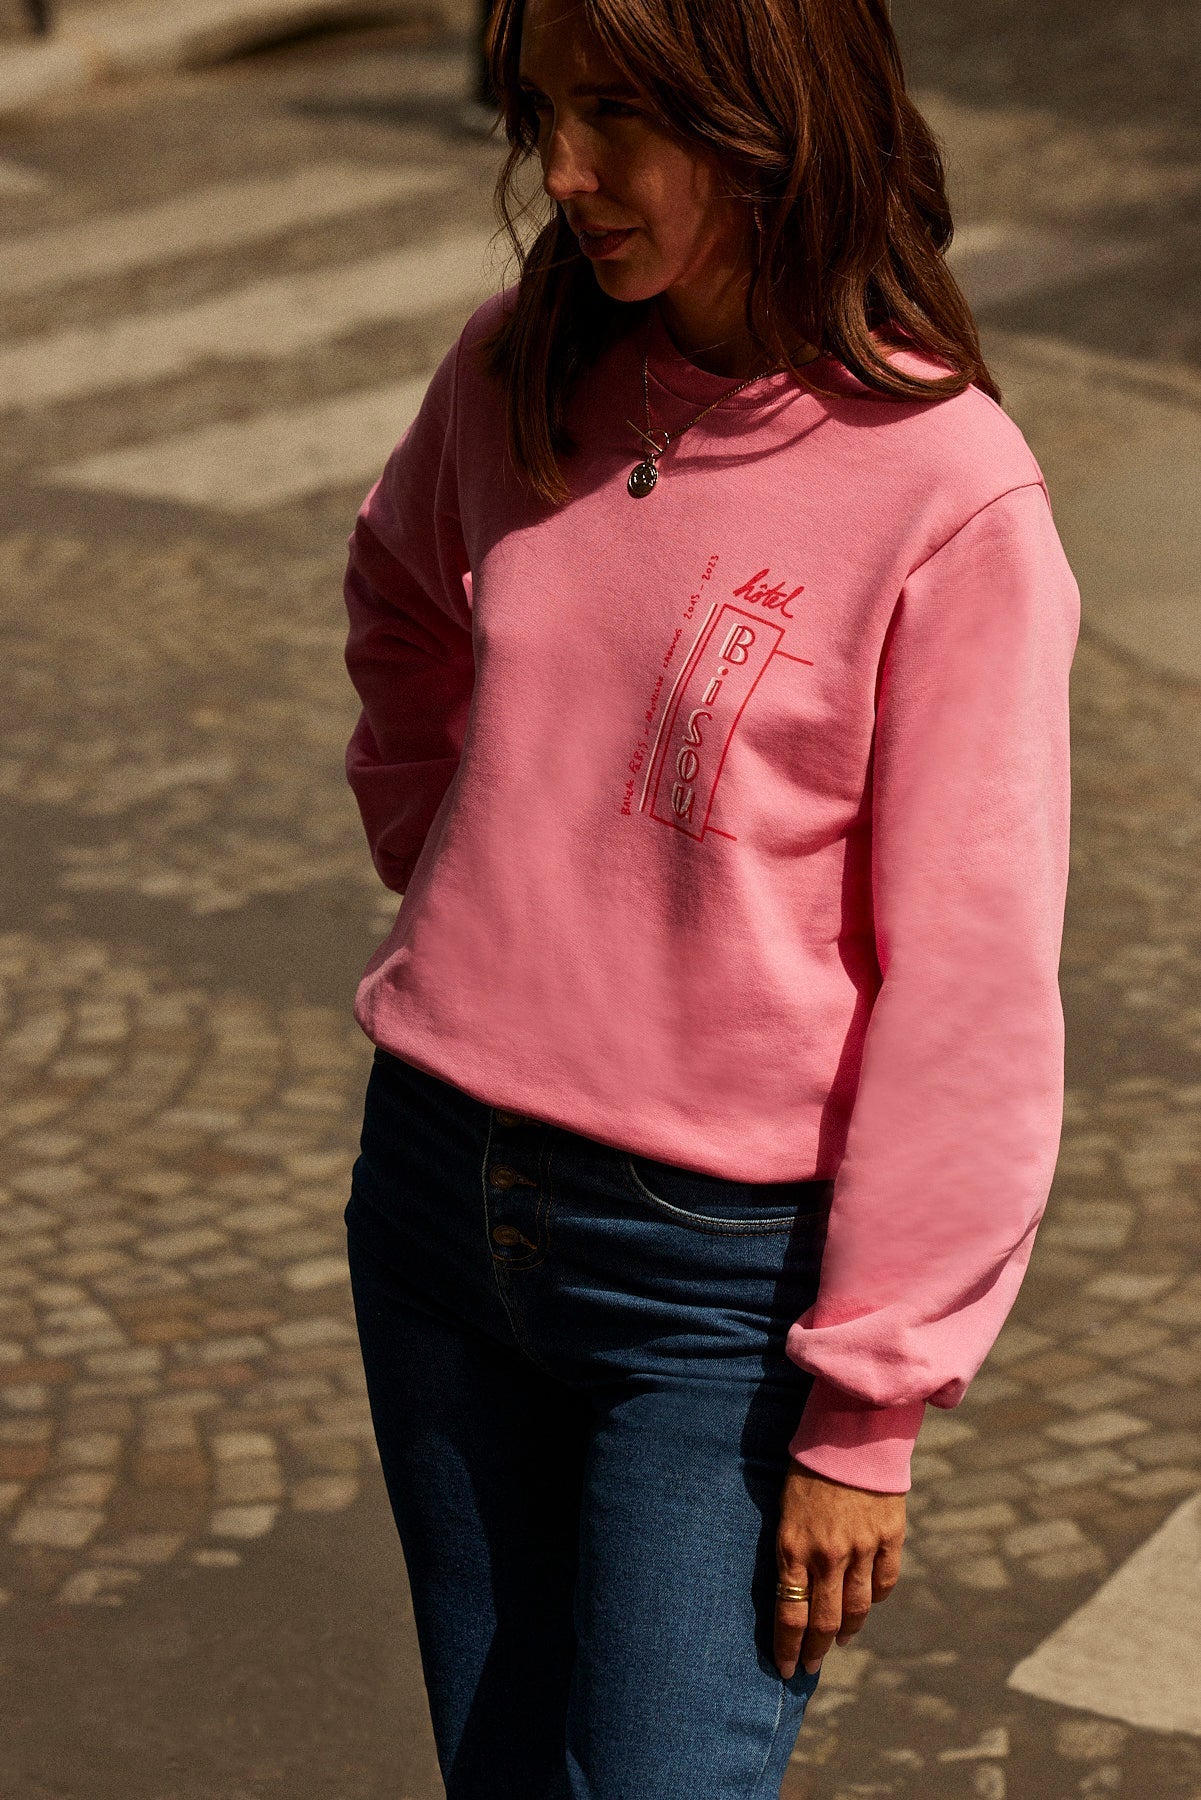 Sweatshirt Anvers Hotel kisses pink and red